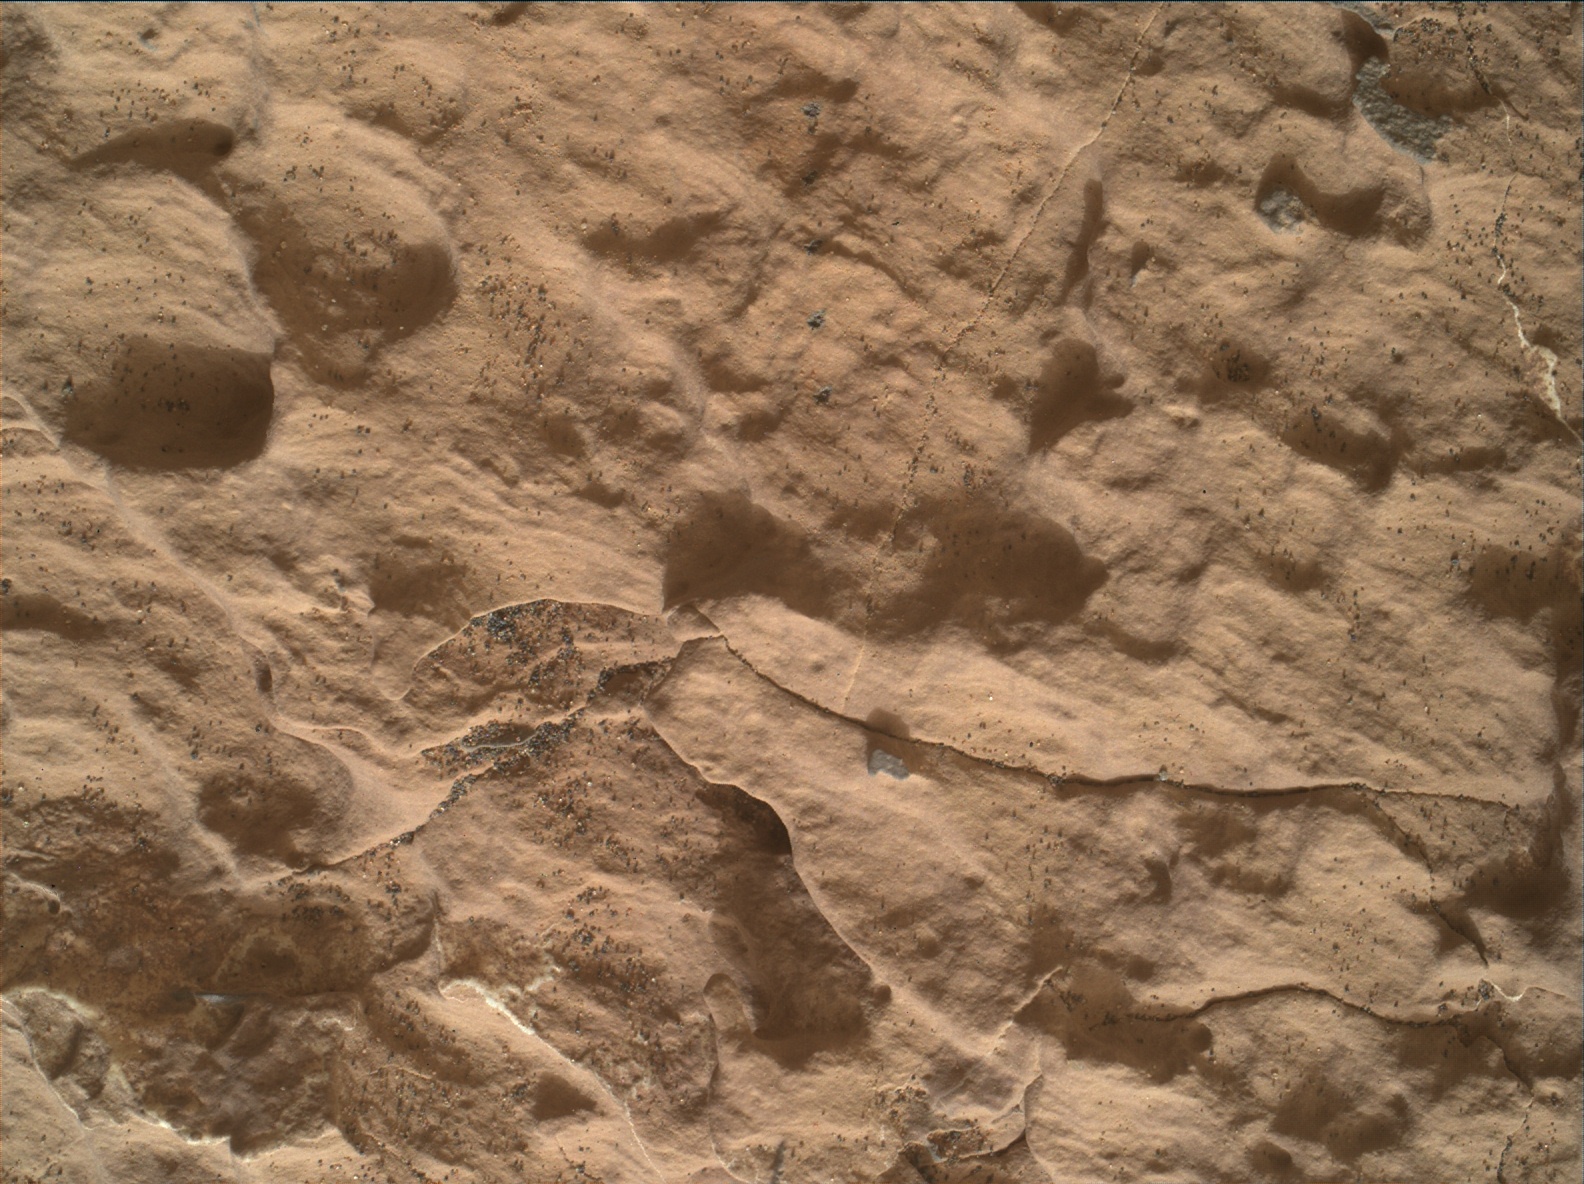 Nasa's Mars rover Curiosity acquired this image using its Mars Hand Lens Imager (MAHLI) on Sol 1668